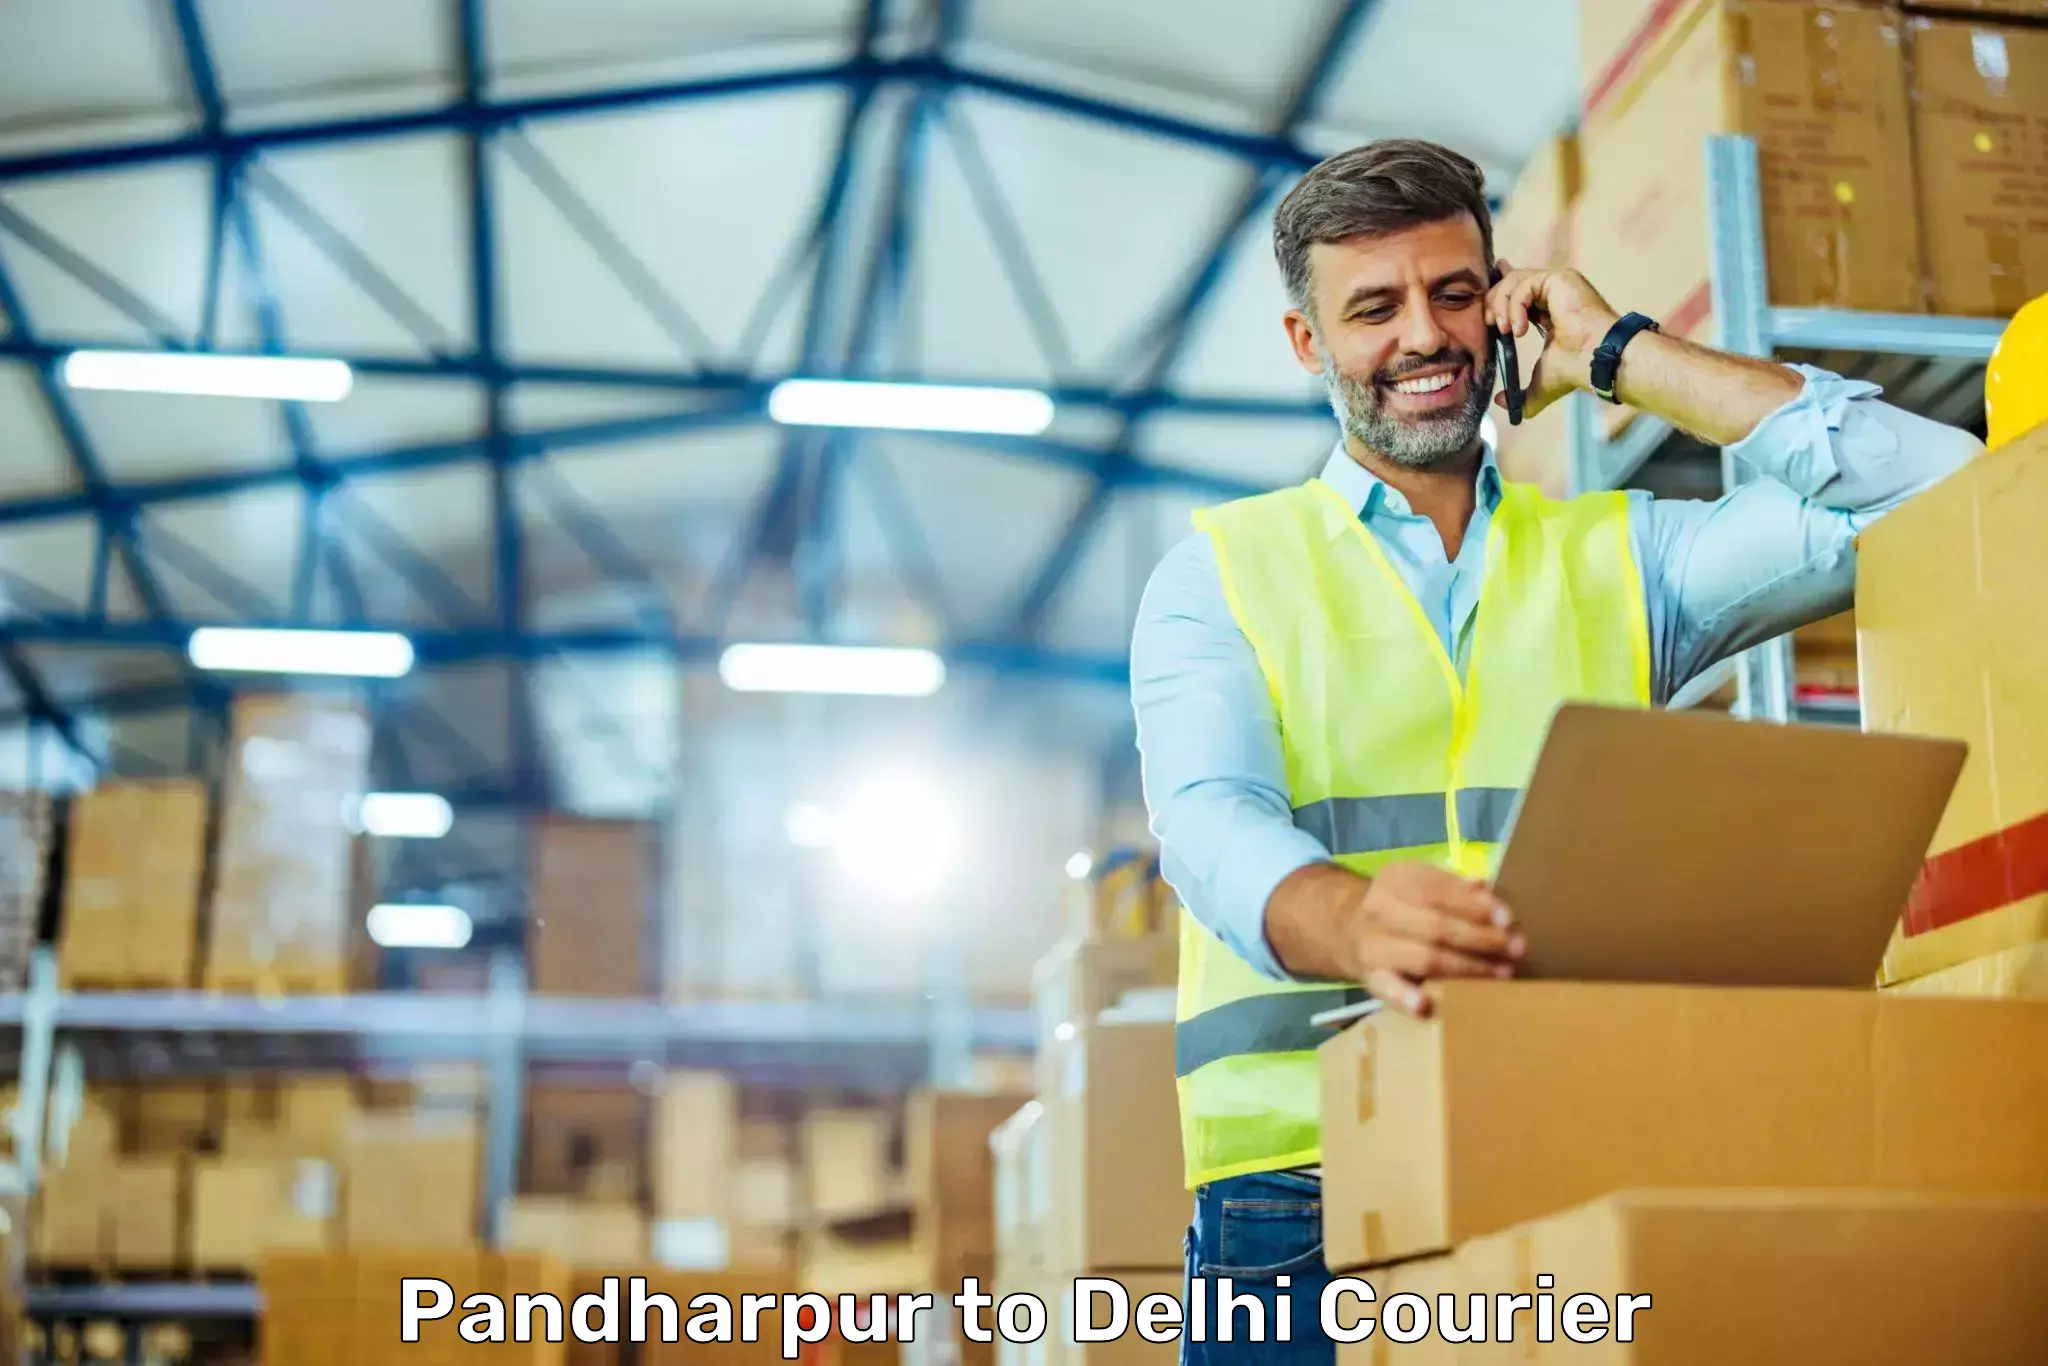 On-call courier service Pandharpur to Delhi